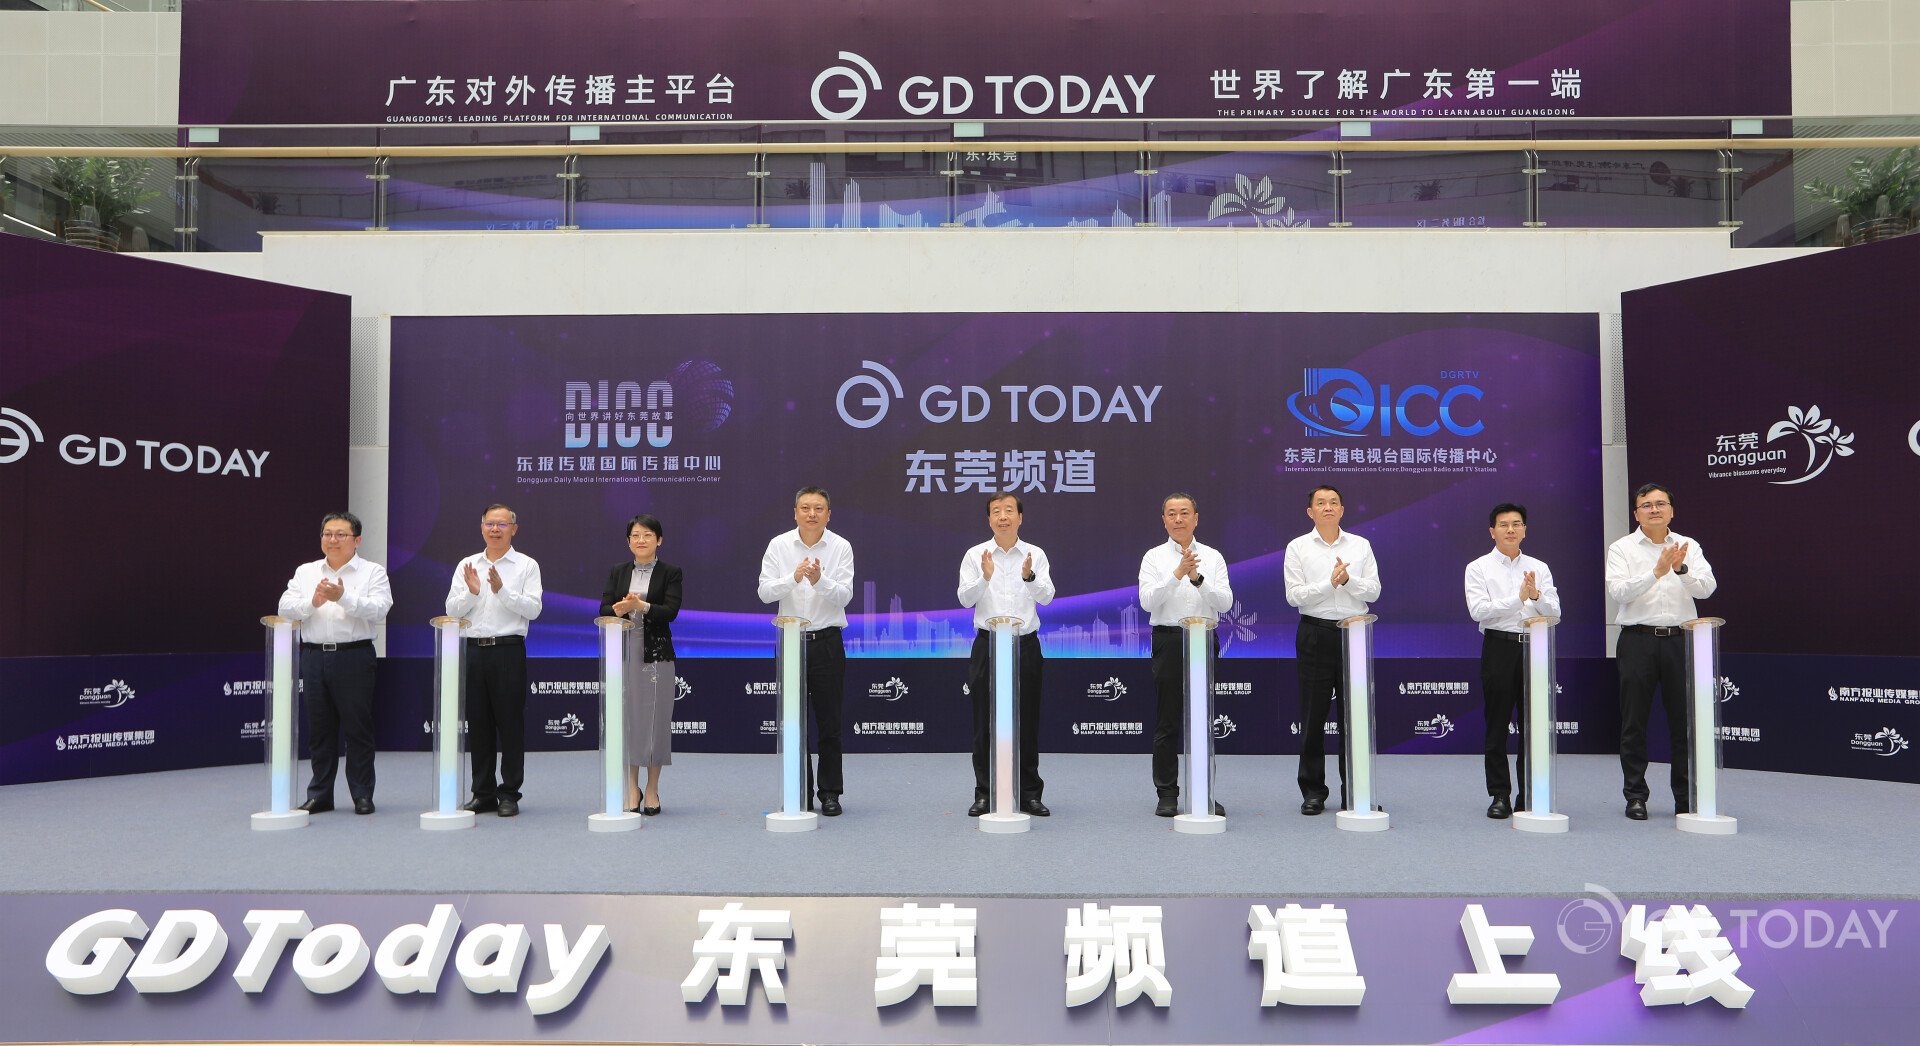 GDToday's first city channel featuring Dongguan launched today